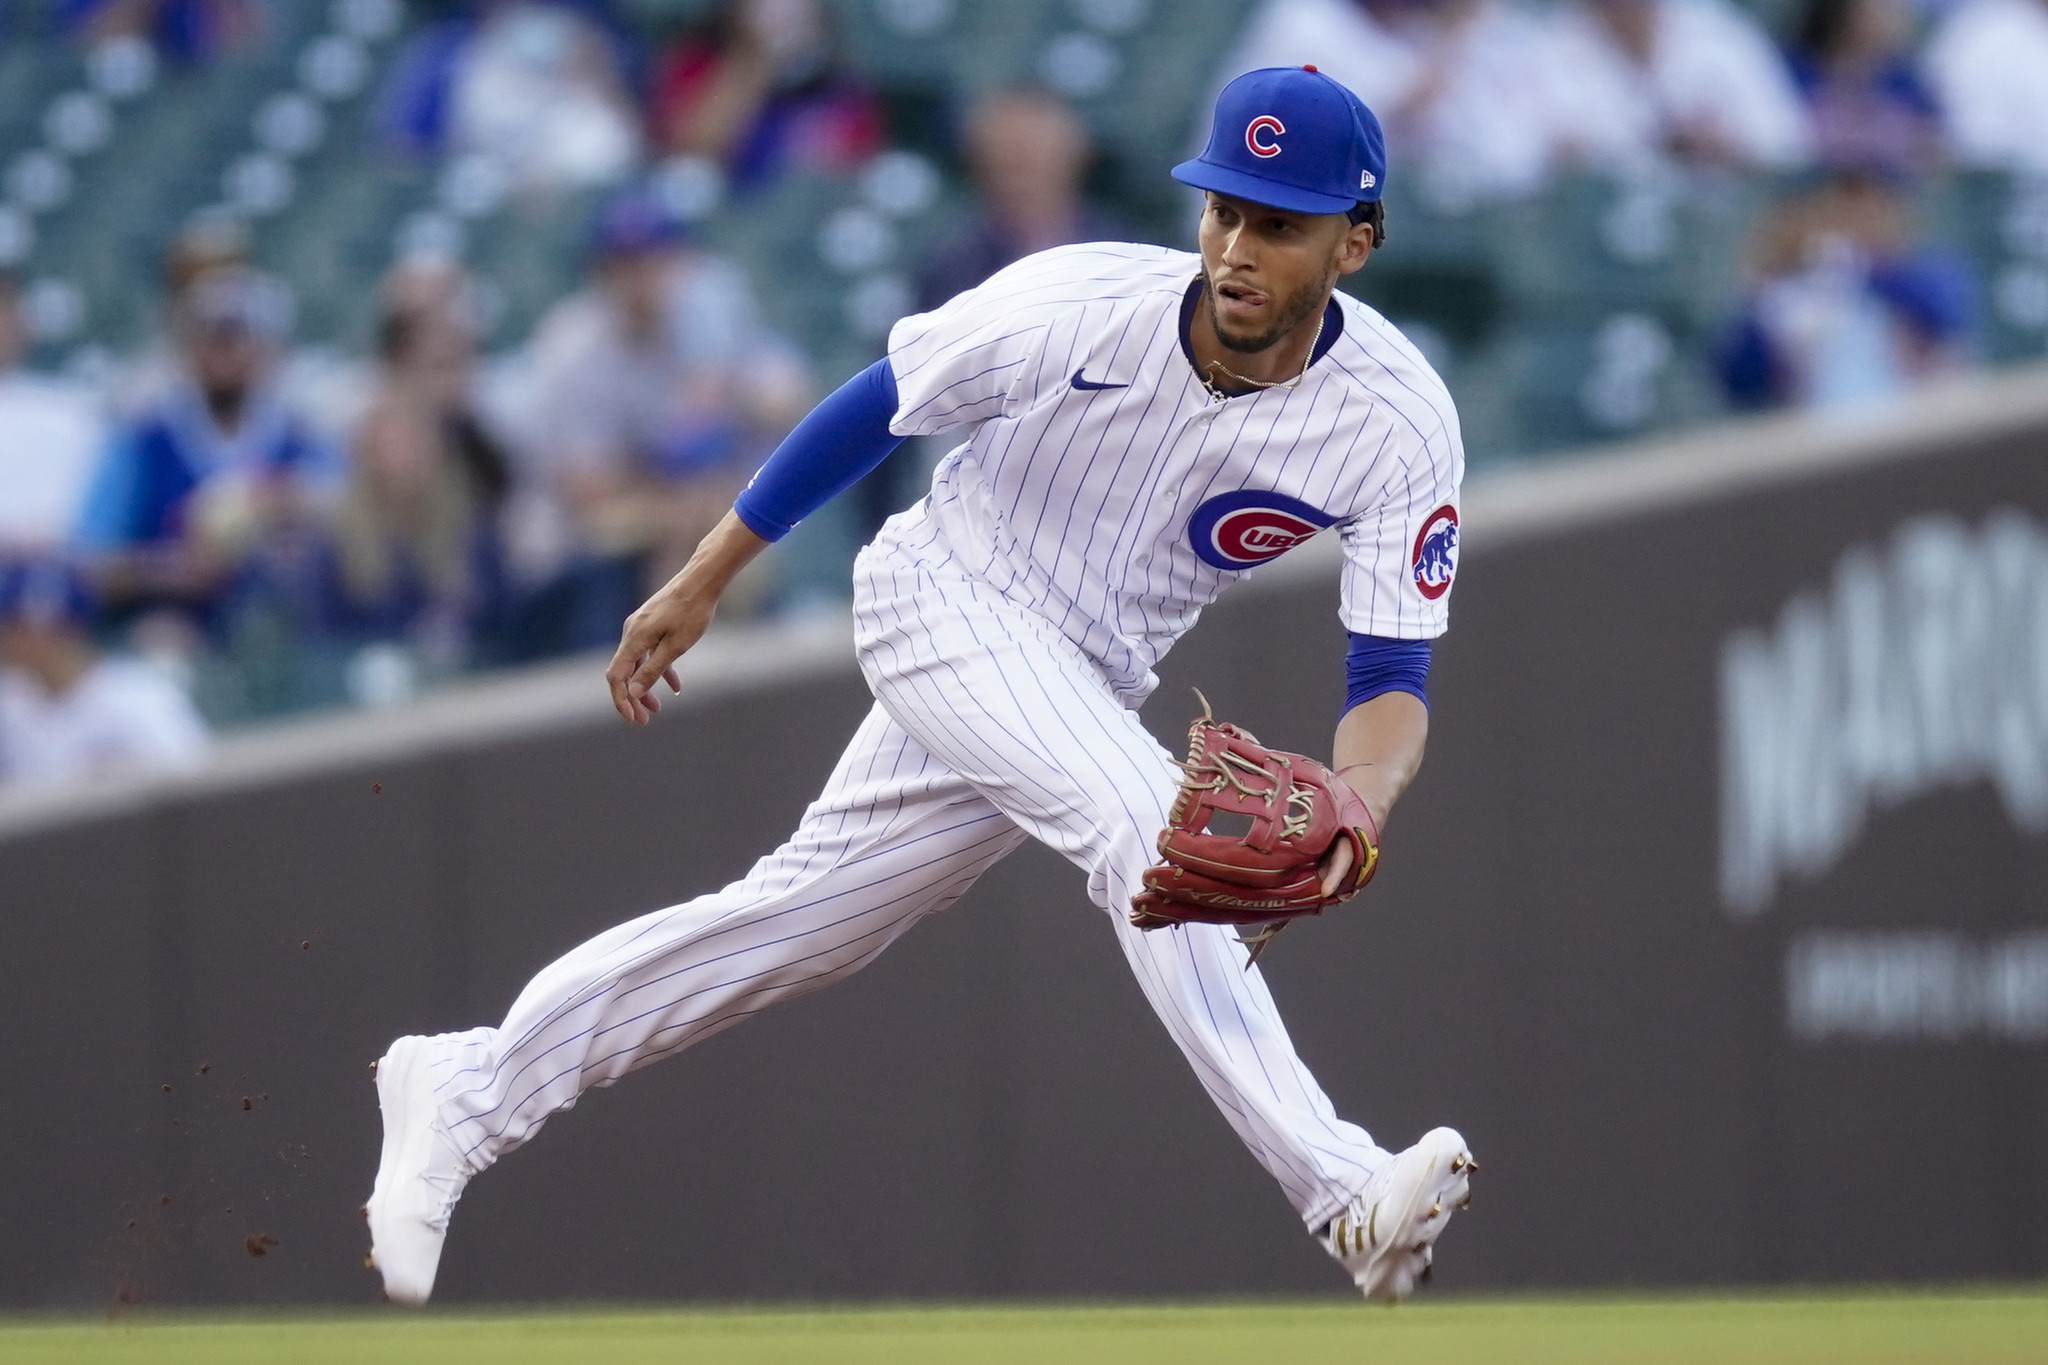 Nick Madrigal moves to third base for Cubs entering Spring Training